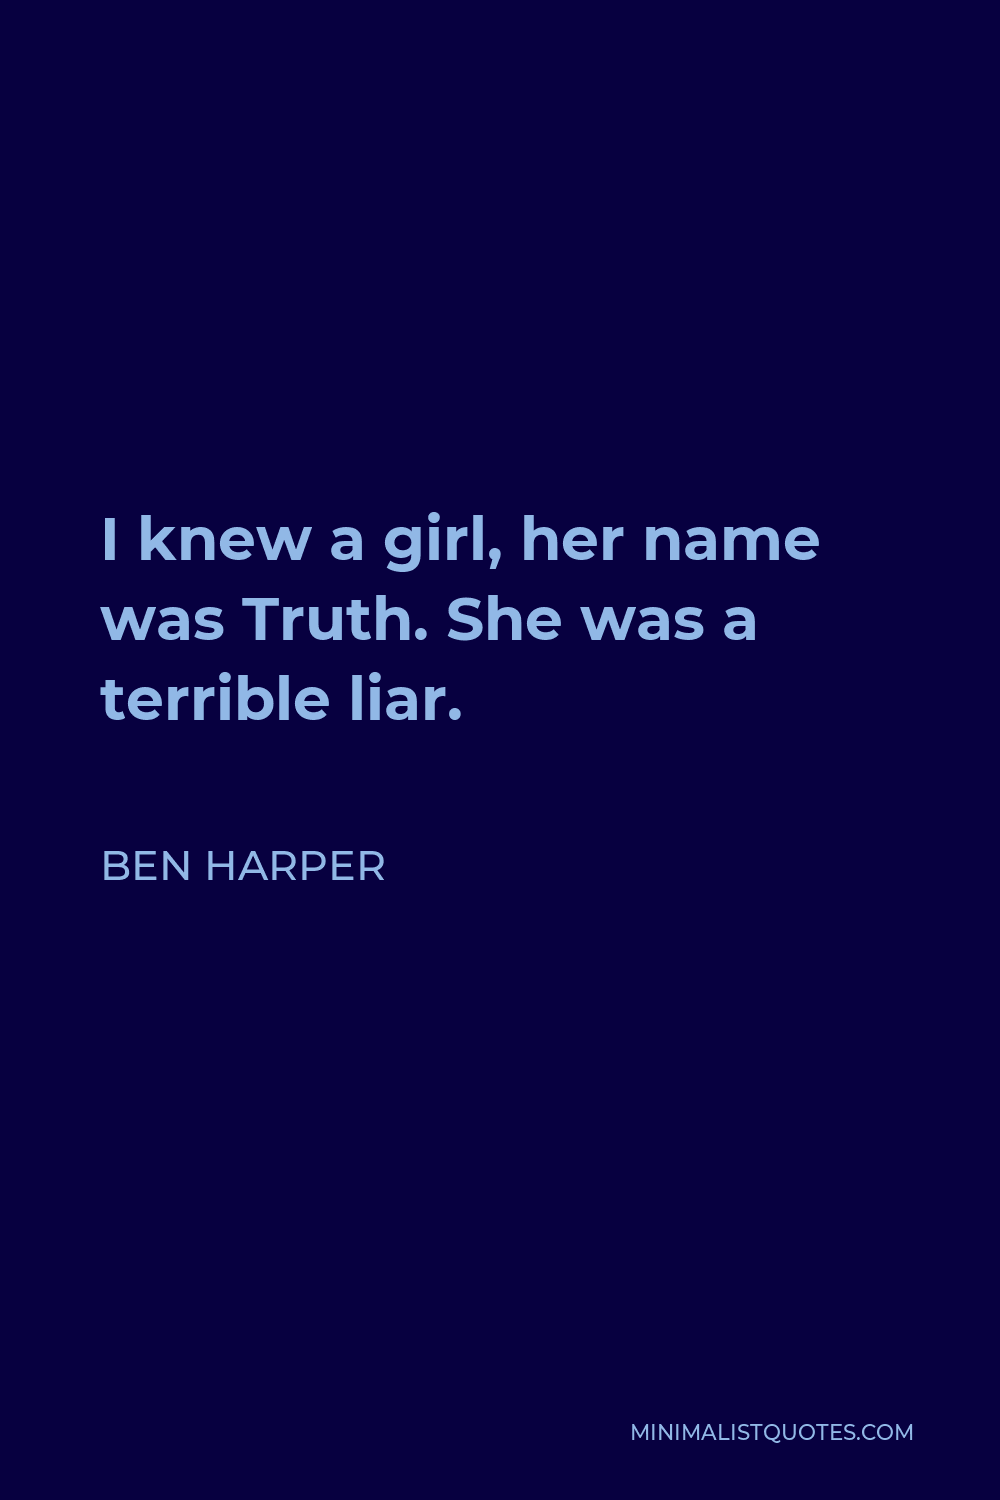 Ben Harper Quote - I knew a girl, her name was Truth. She was a terrible liar.